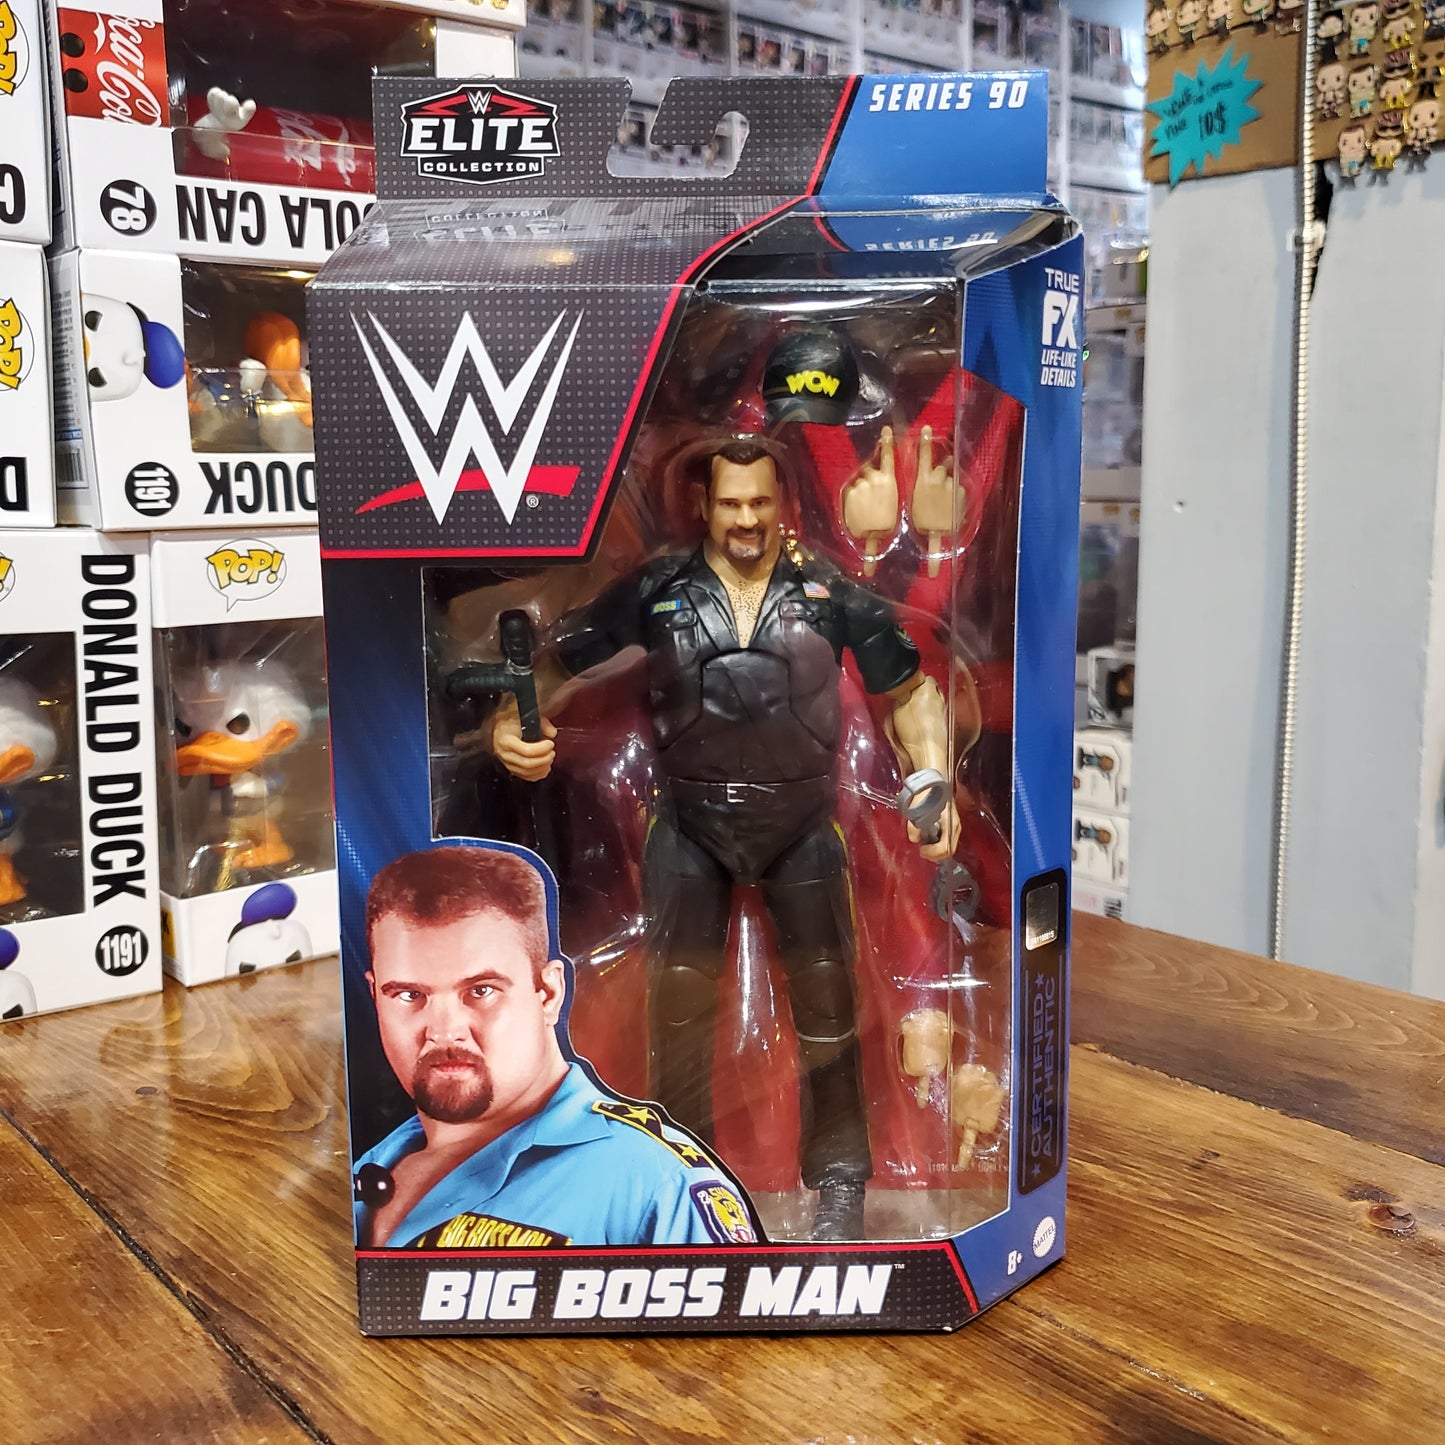 WWE - Big Boss Man - Elite Collection Action Figure (Series 90) (Sports)